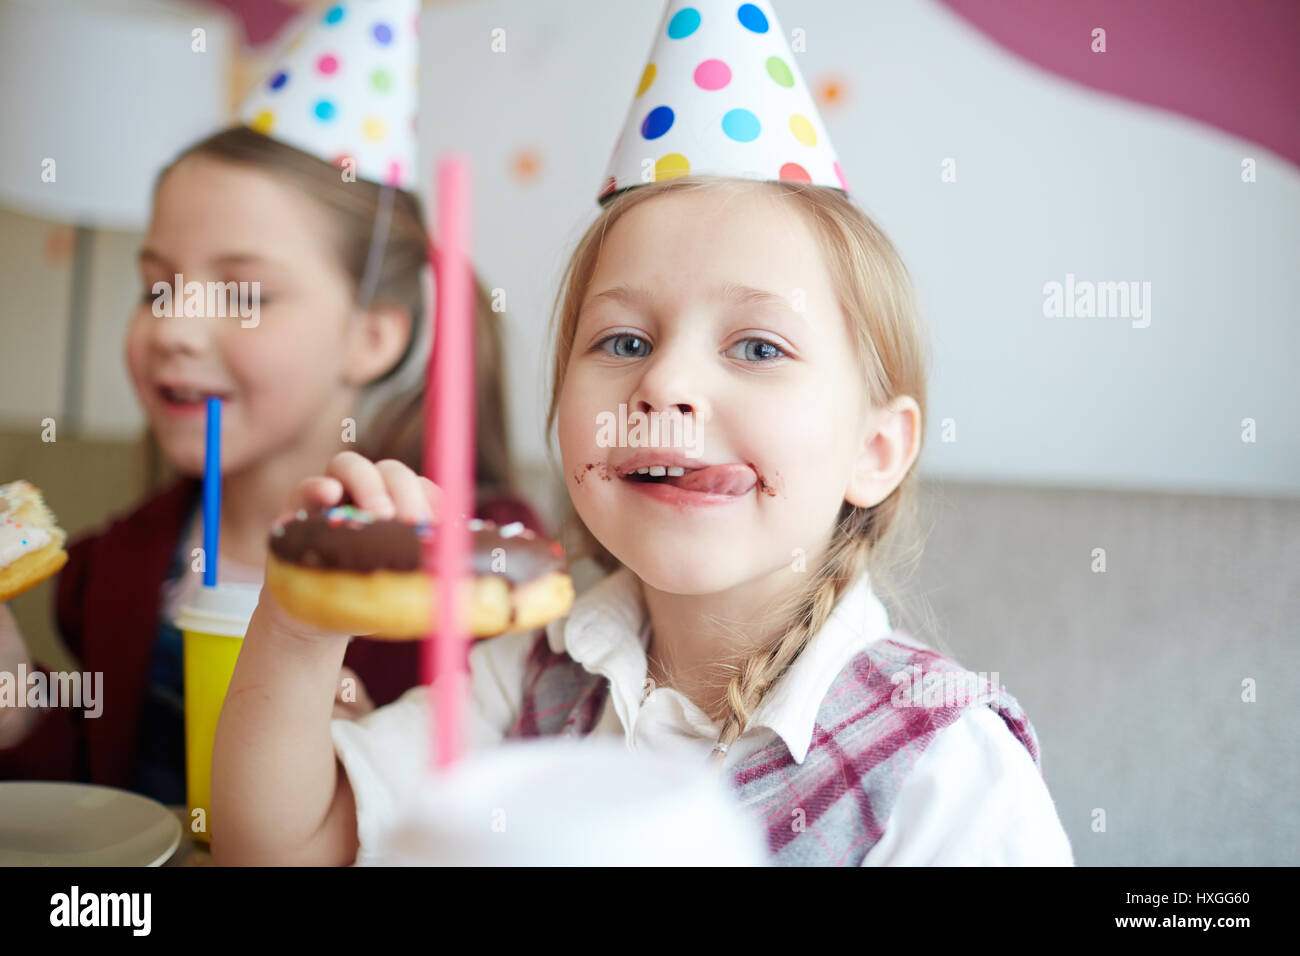 Cute girl licking her lips while eating yummy donut with chocolate glaze Stock Photo